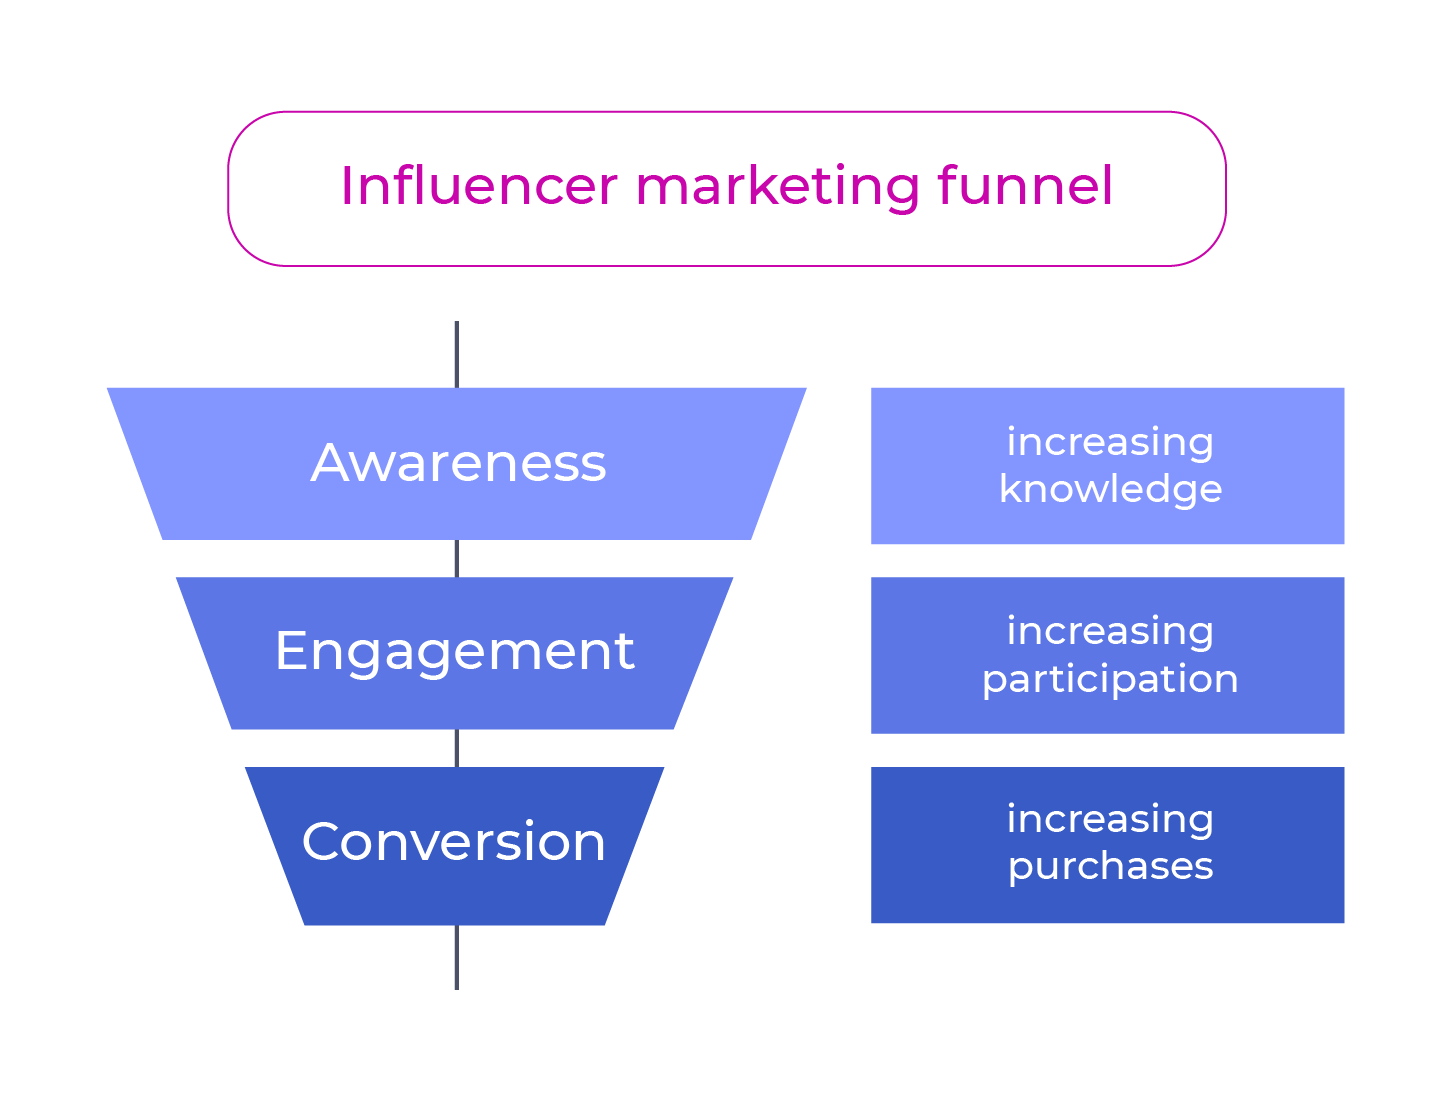 The three levels of the influencer marketing funnel